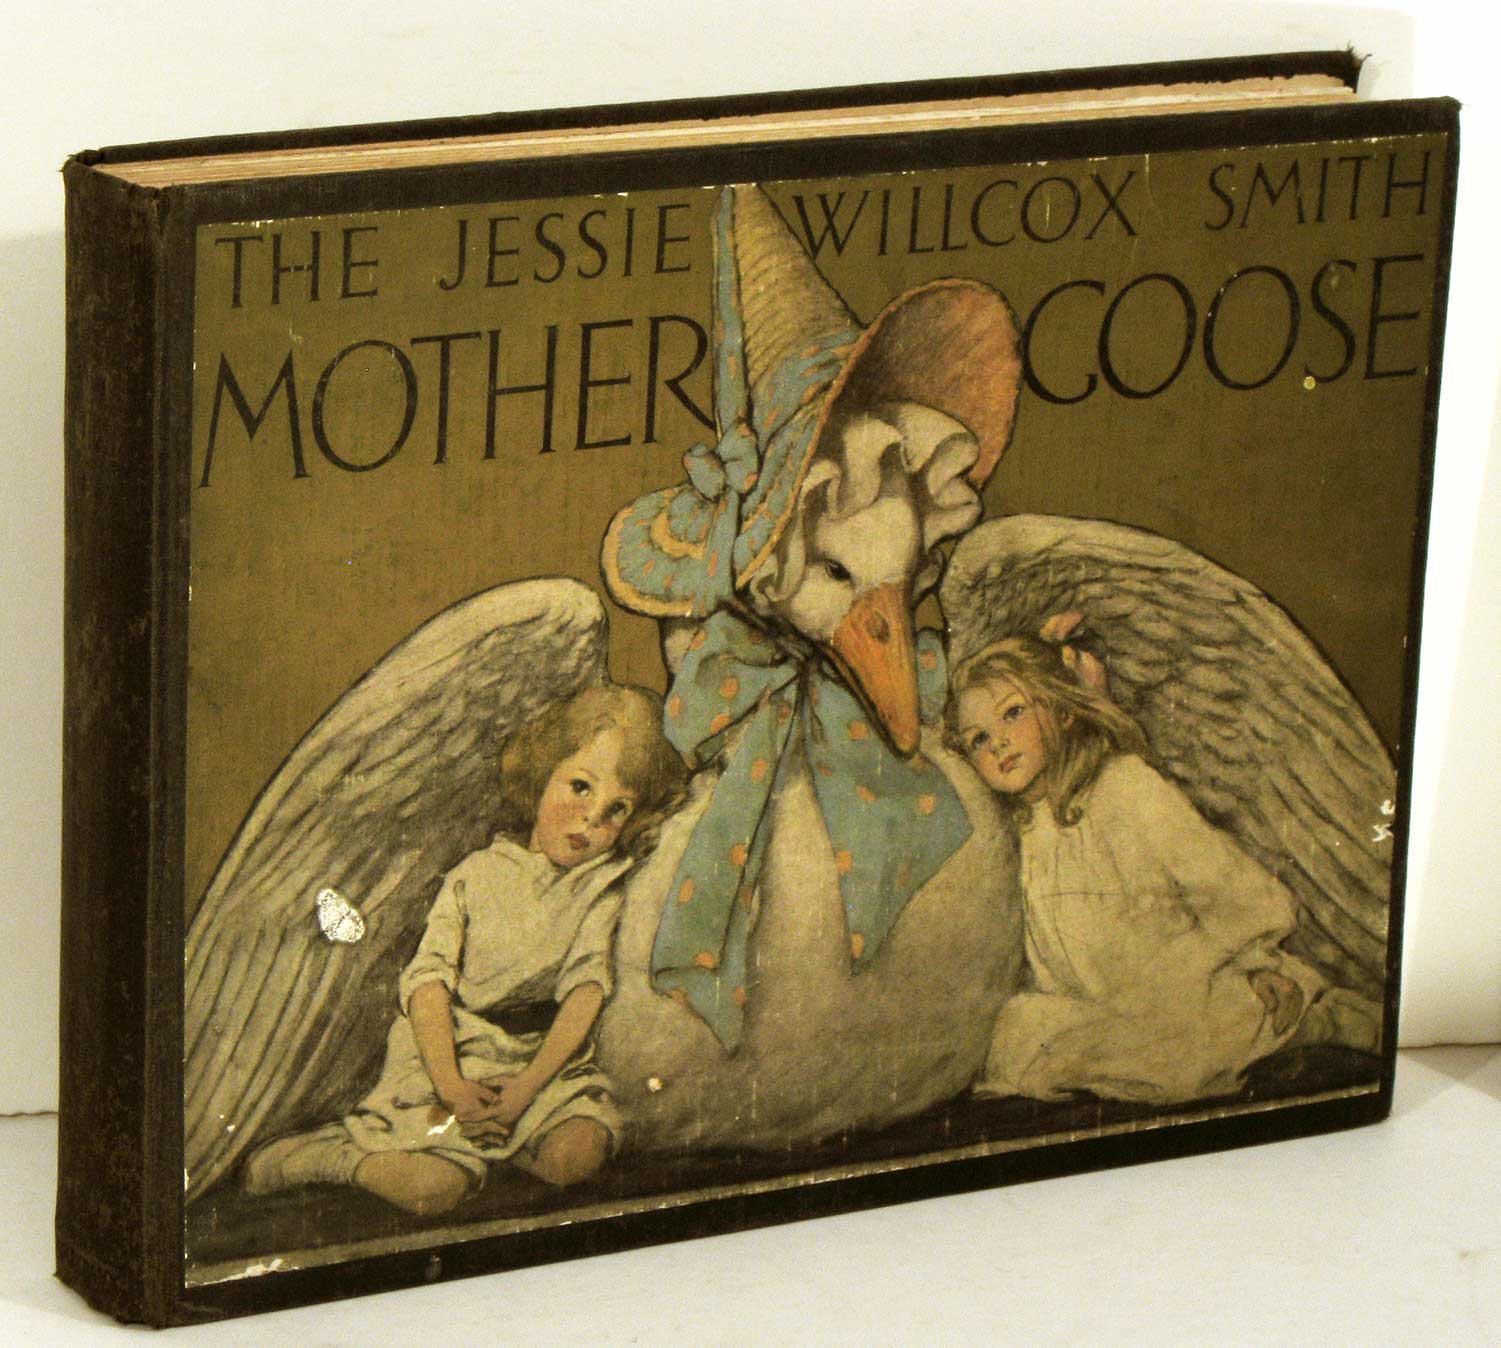 The Jessie Willcox Smith Mother Goose. A Careful and Full Selection of the Rhymes. - SMITH, JESSIE WILLCOX) Smith, Jessie Willcox (illus).